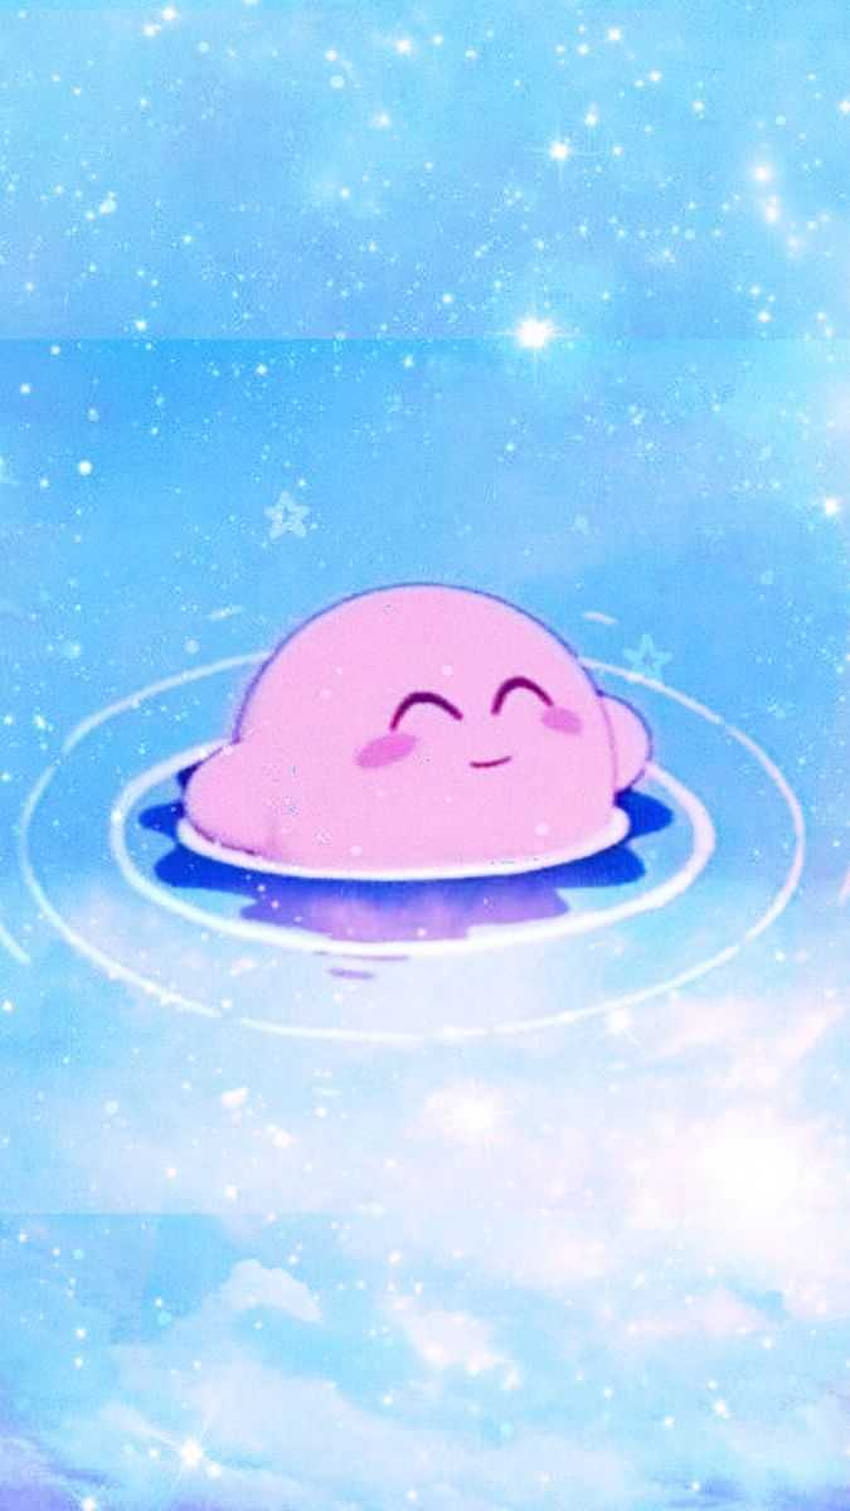 Wallpaper ID 443987  Video Game Kirby Phone Wallpaper  750x1334 free  download